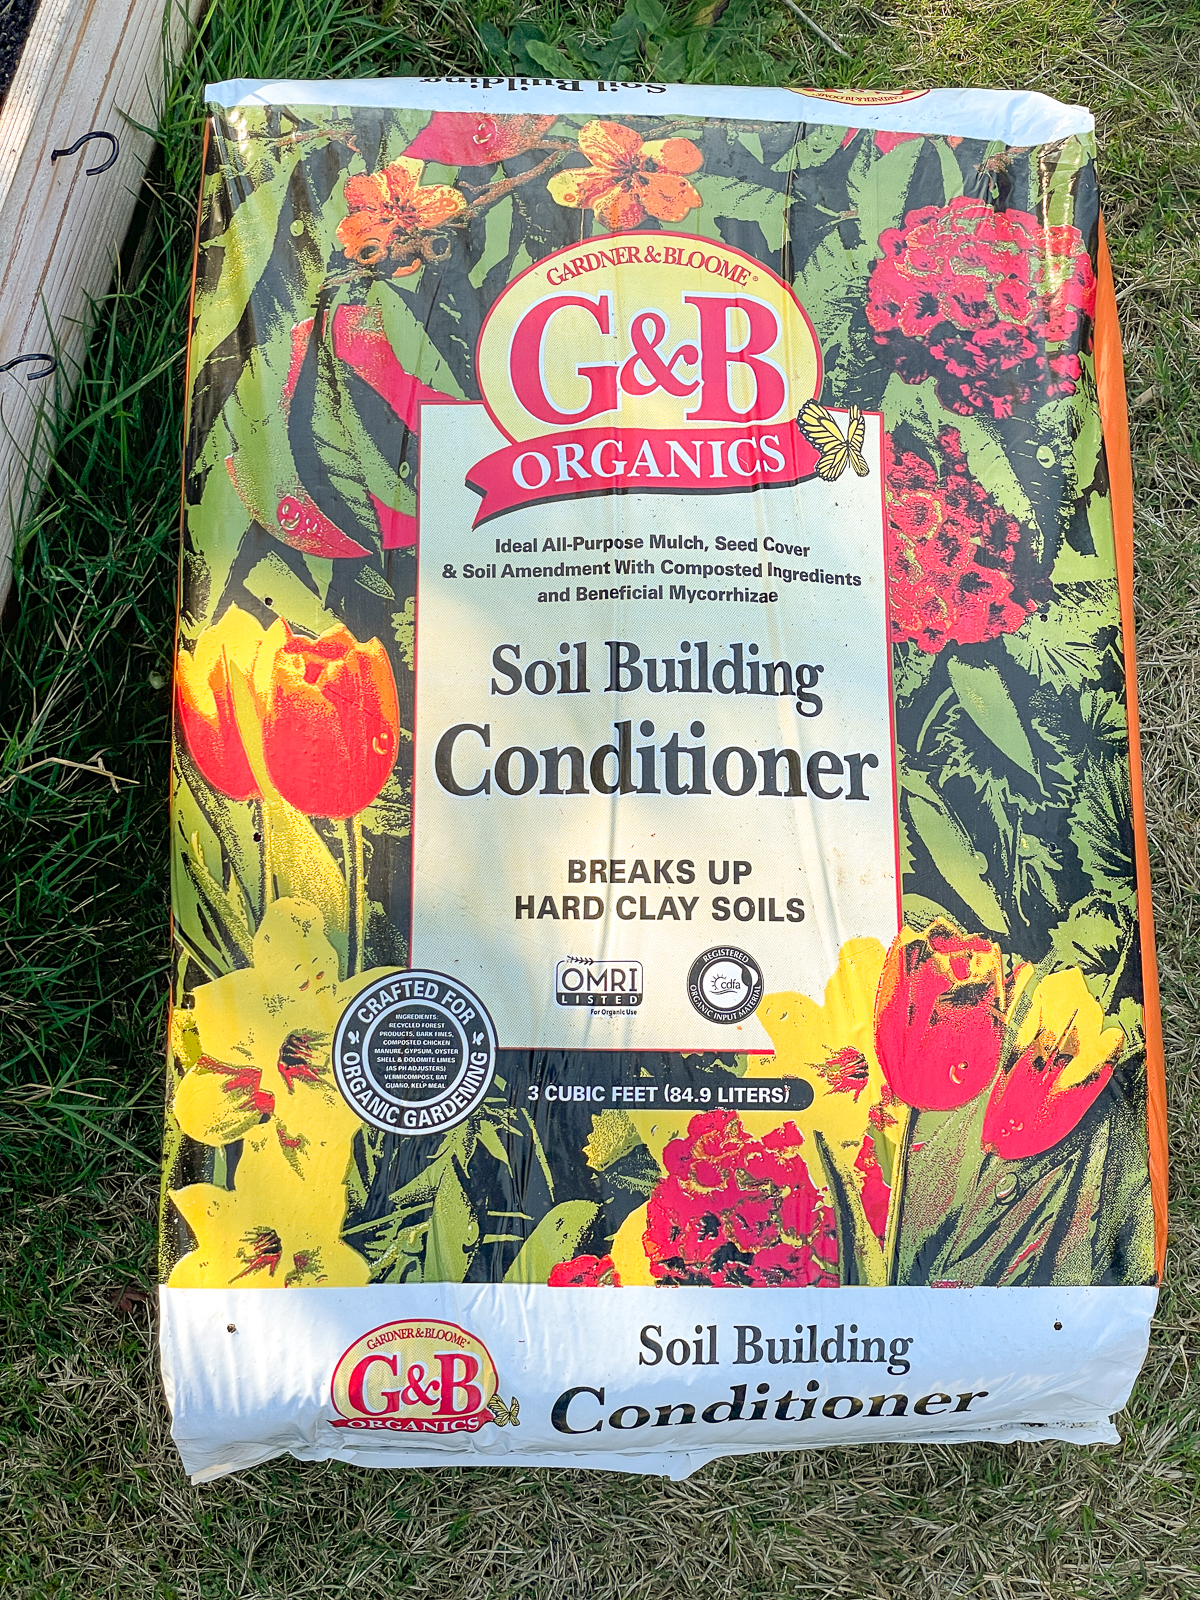 bag of G&B soil building conditioner next to raised bed